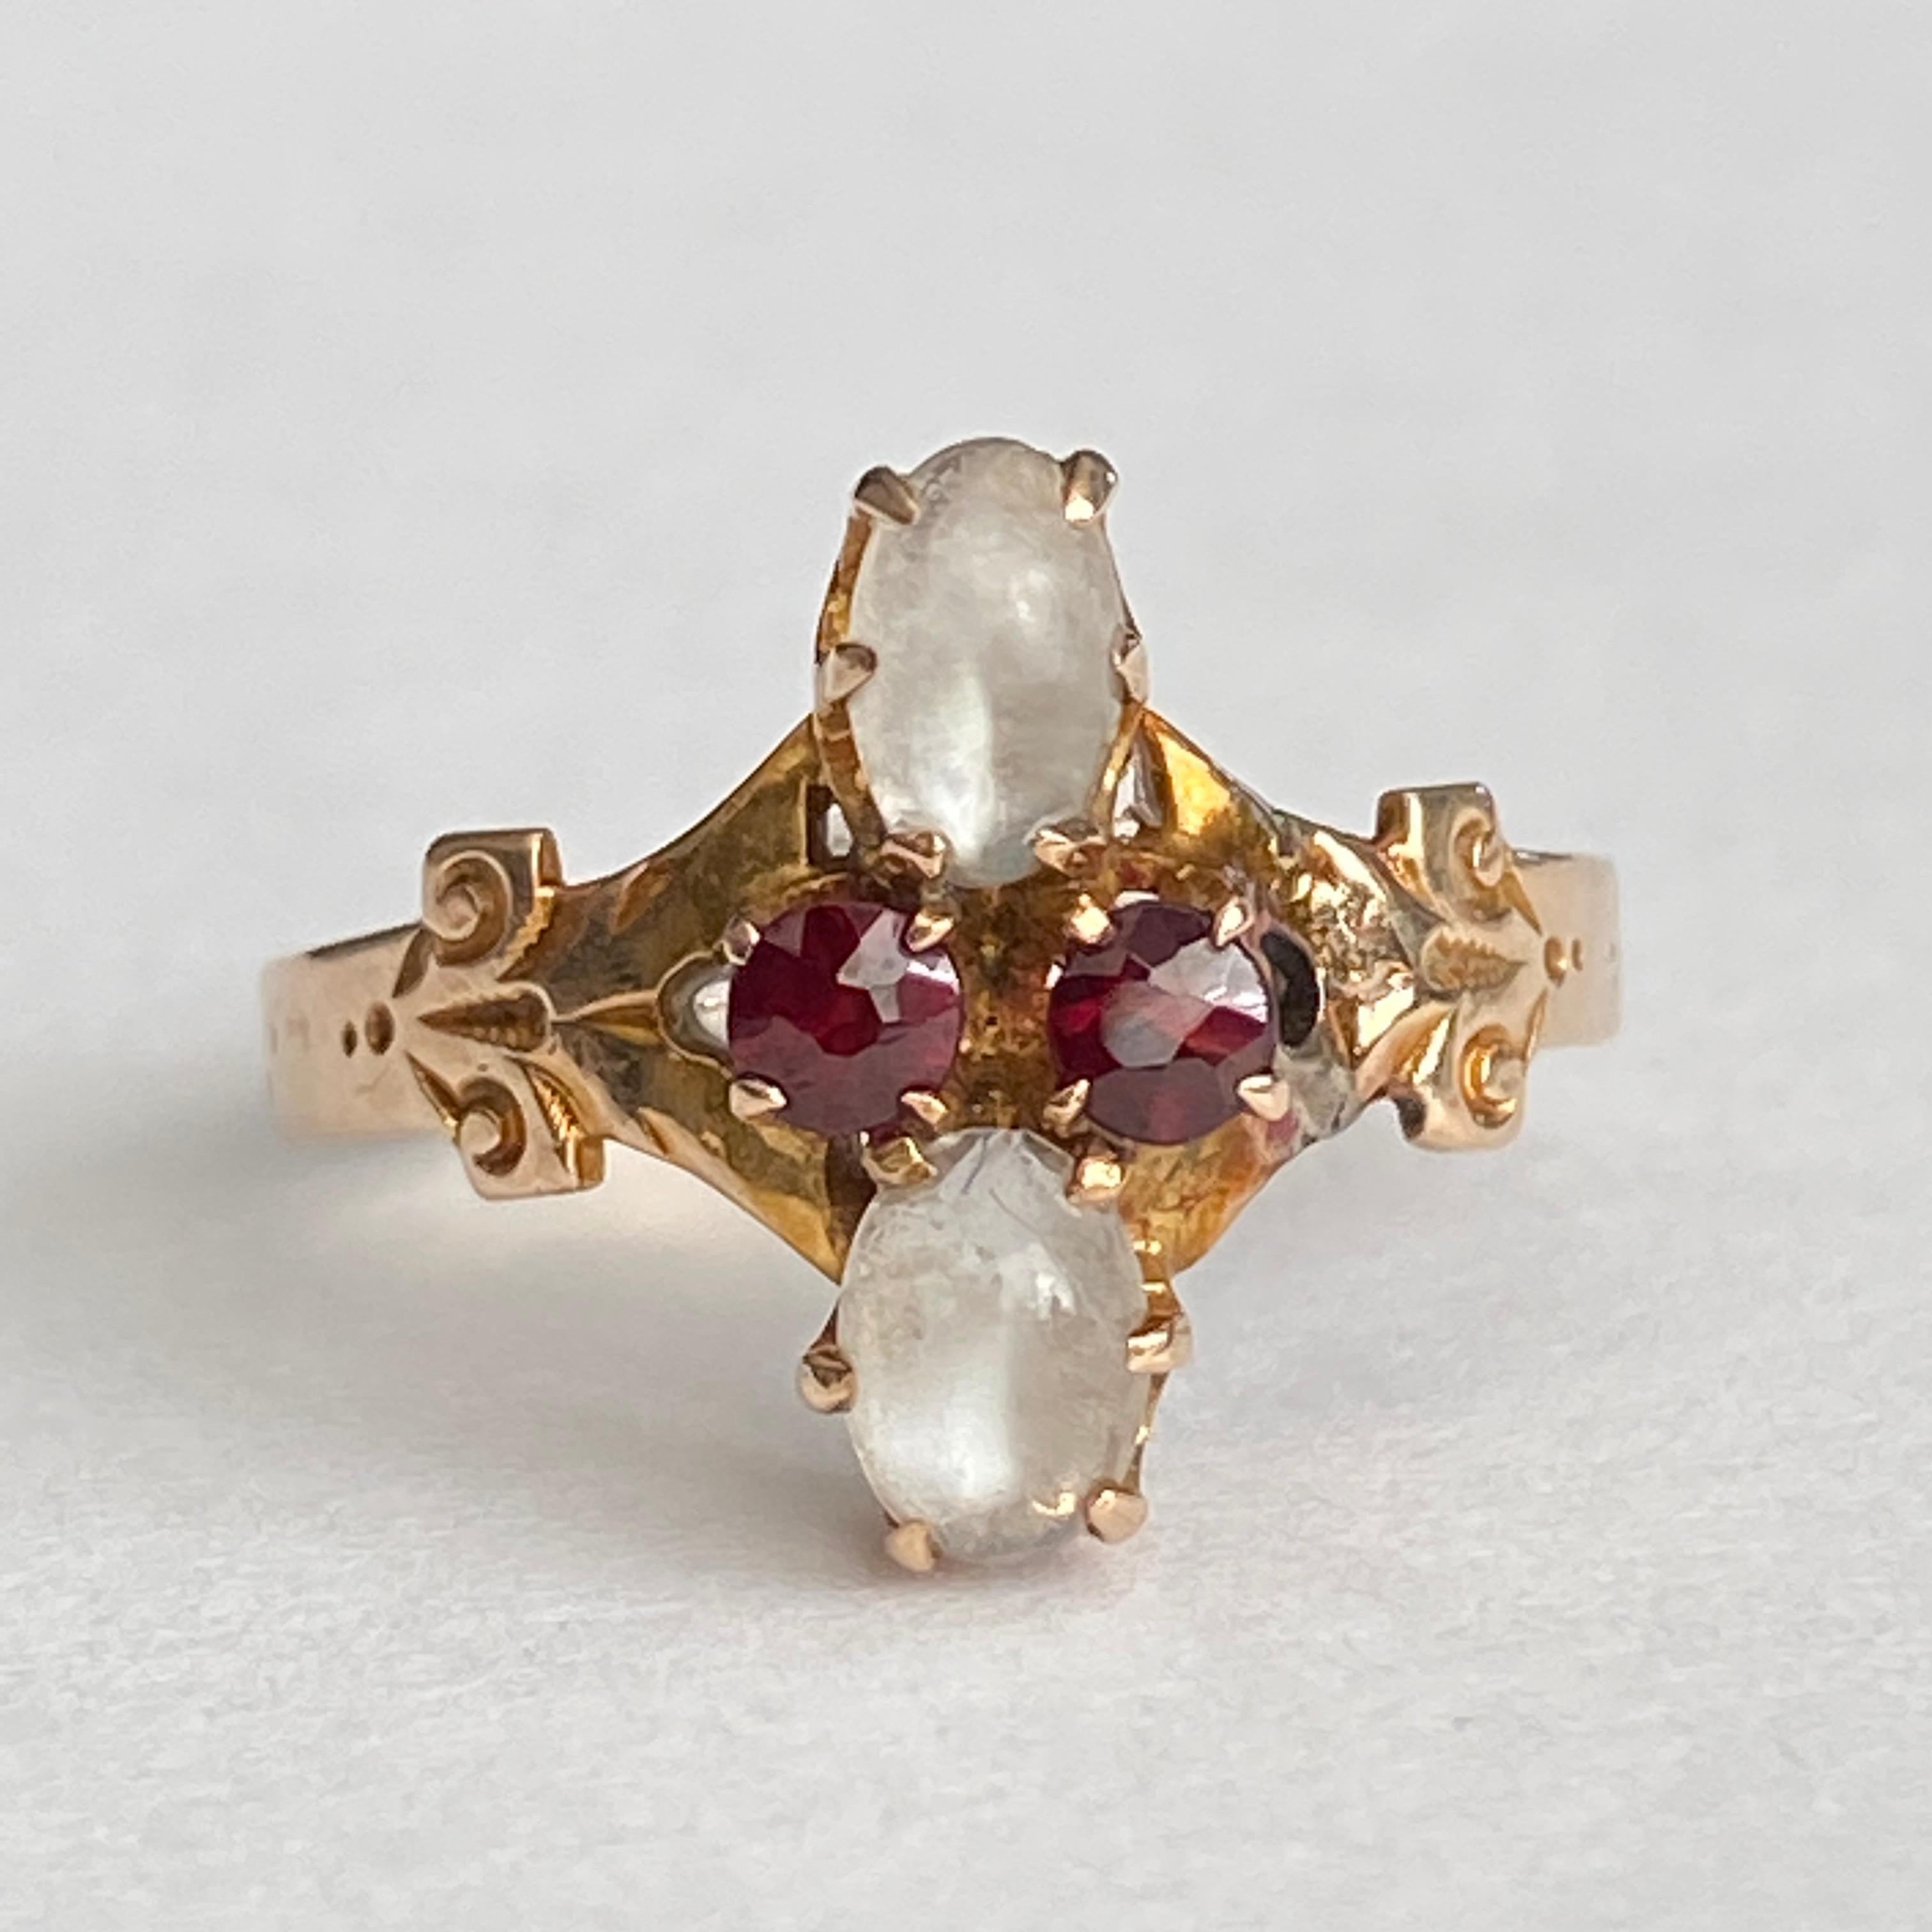 Details:
Super sweet Victorian ring with moonstones and garnets. The ring is 14K rose gold, and has a lovely engraved pattern sounding the setting. There are 2—5mm x 3mm cabochon moonstones, and 2—2.5mm red garnets. Please ask all necessary